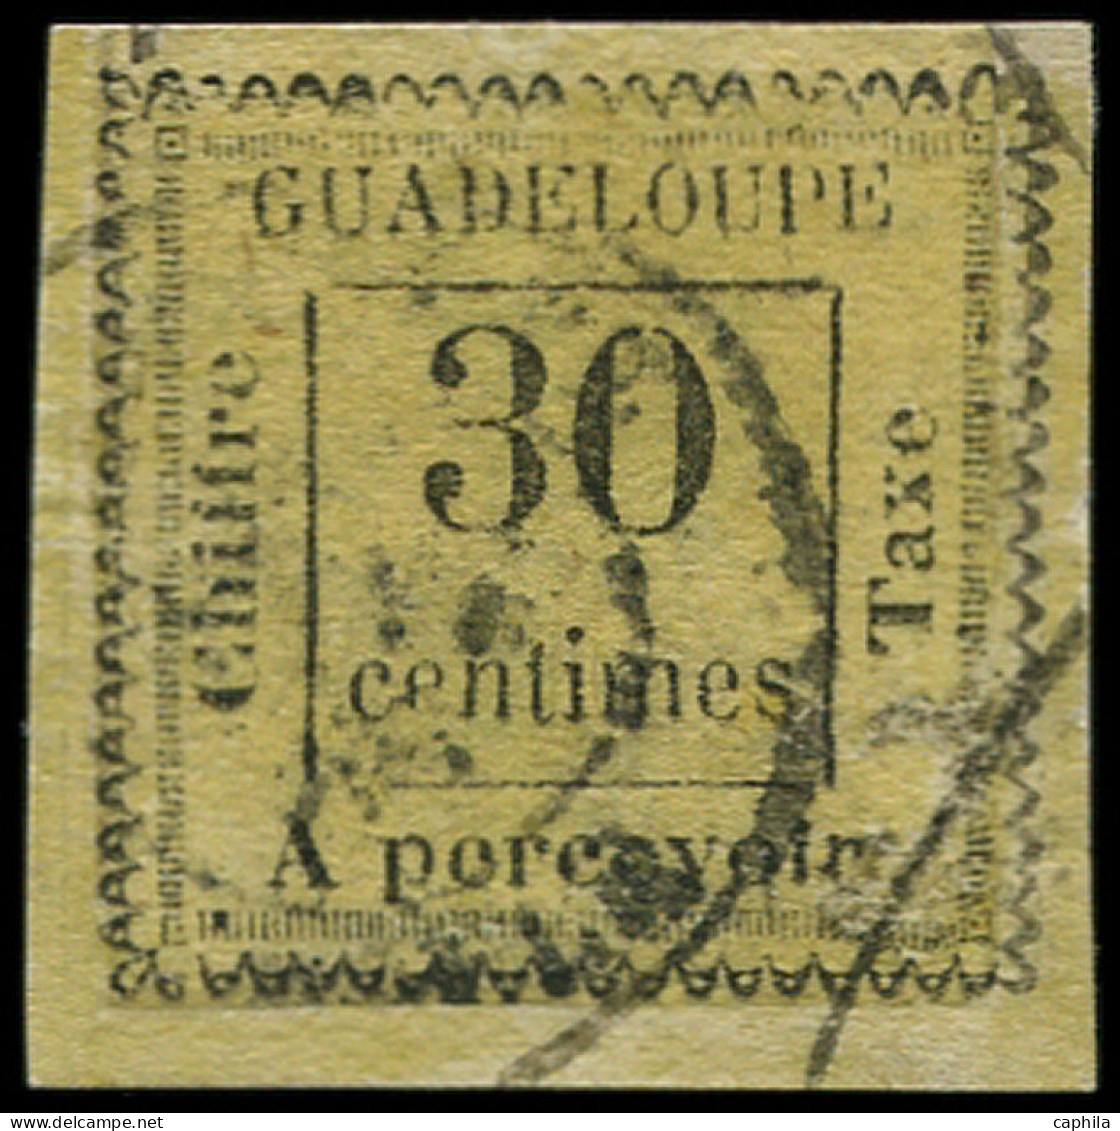 O GUADELOUPE - Taxe - 10, Belles Marges: 30c. Jaune - Postage Due